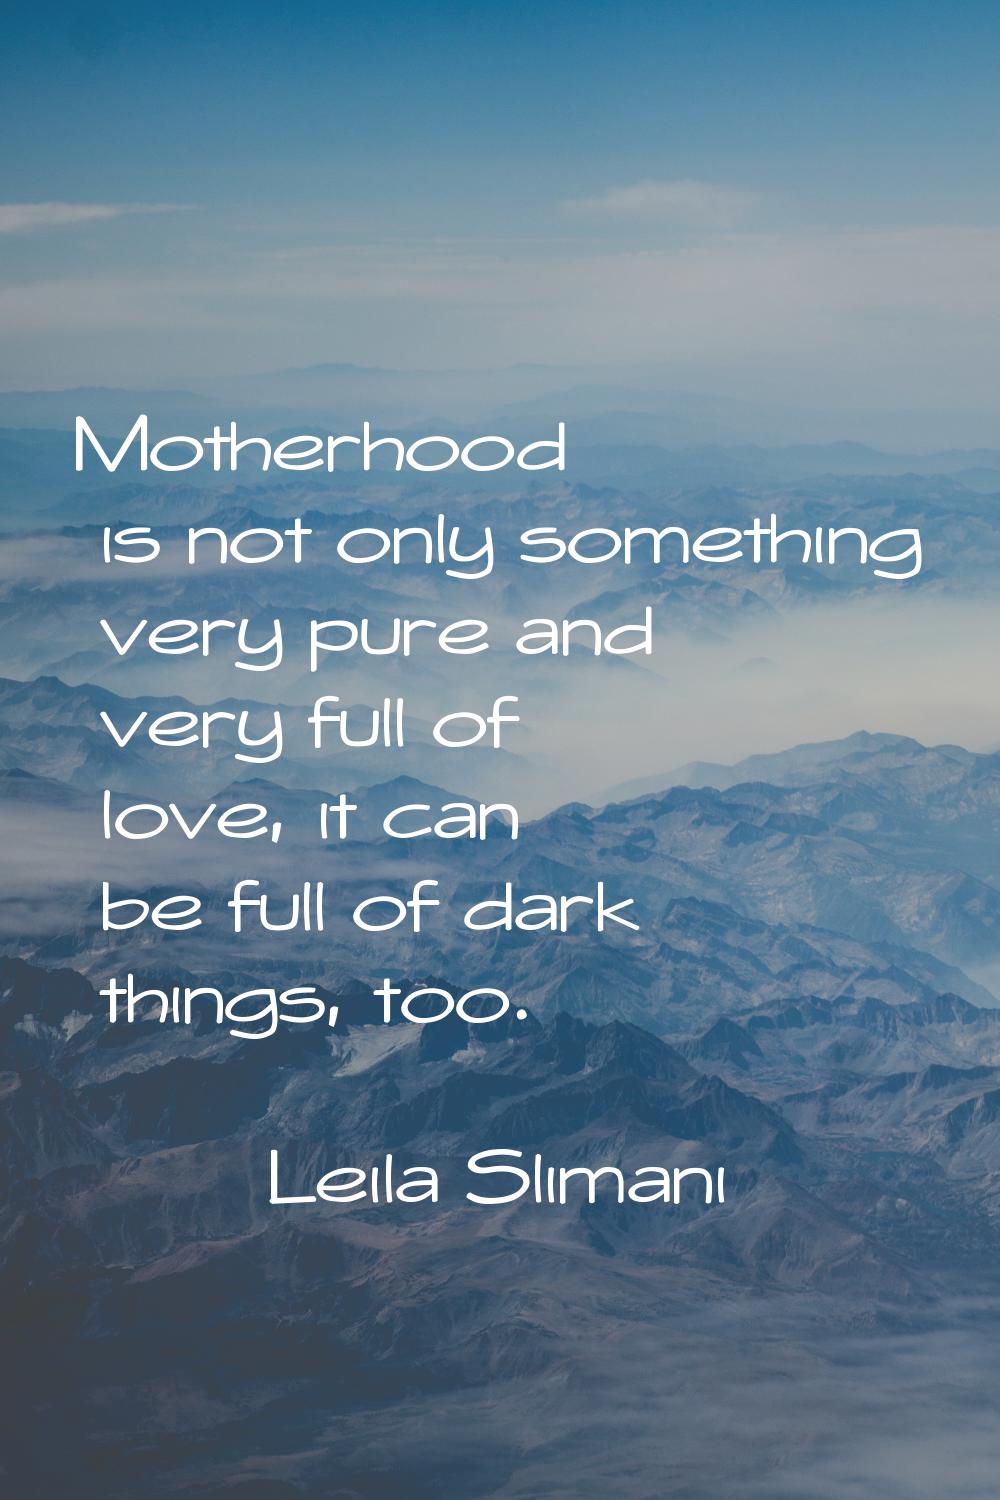 Motherhood is not only something very pure and very full of love, it can be full of dark things, to